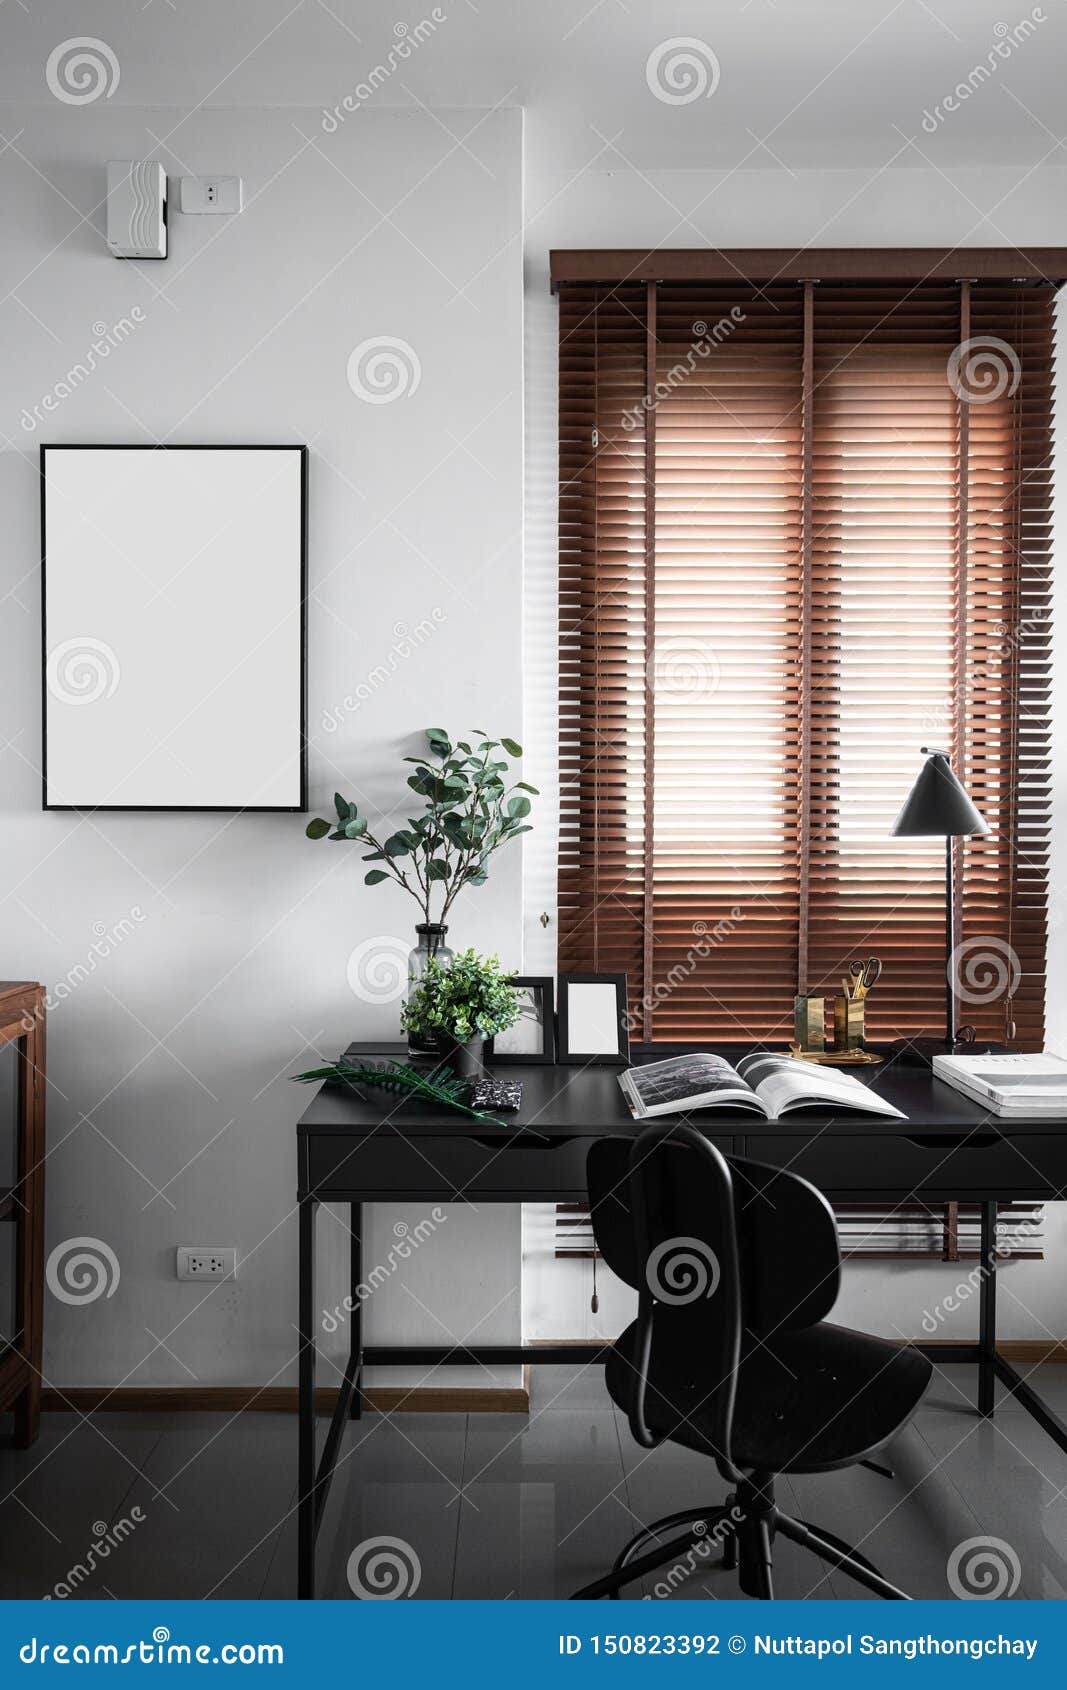 Working Corner In Modern Style With Black Spray Paint Working